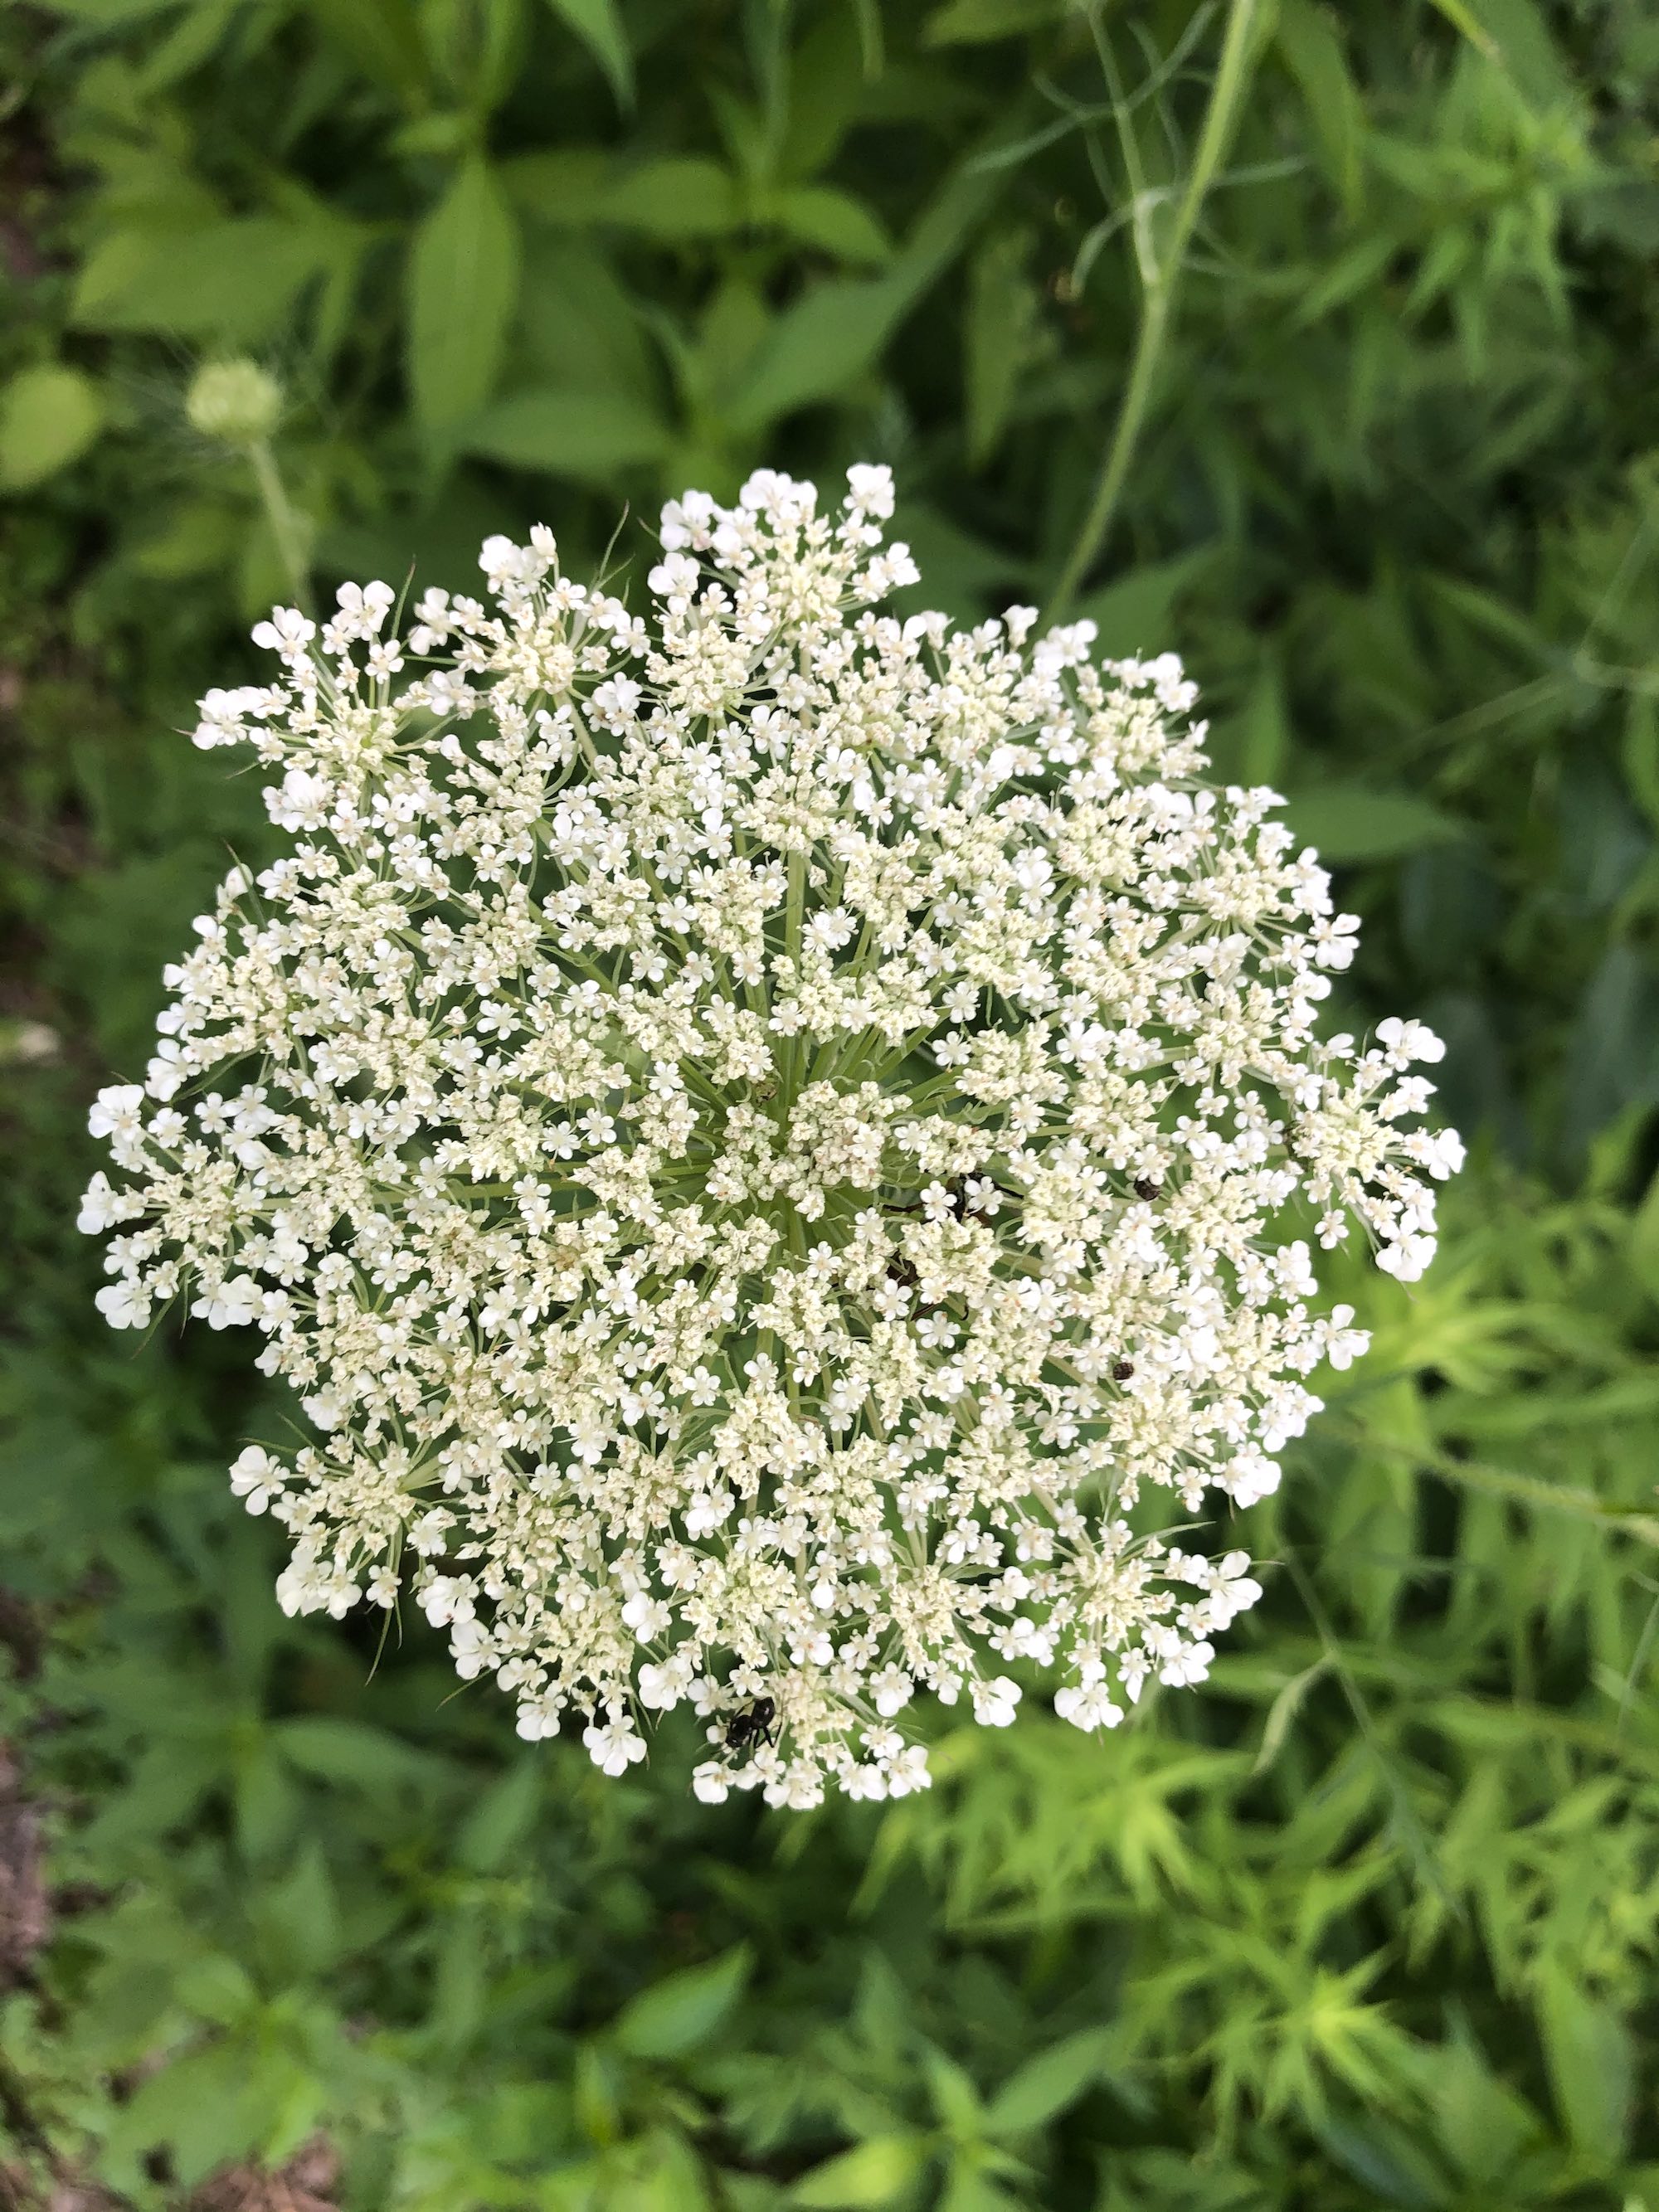 Queen Anne's Lace on shore of Lake Wingra in Wingra Park in Madison, WI on June 6, 2020.